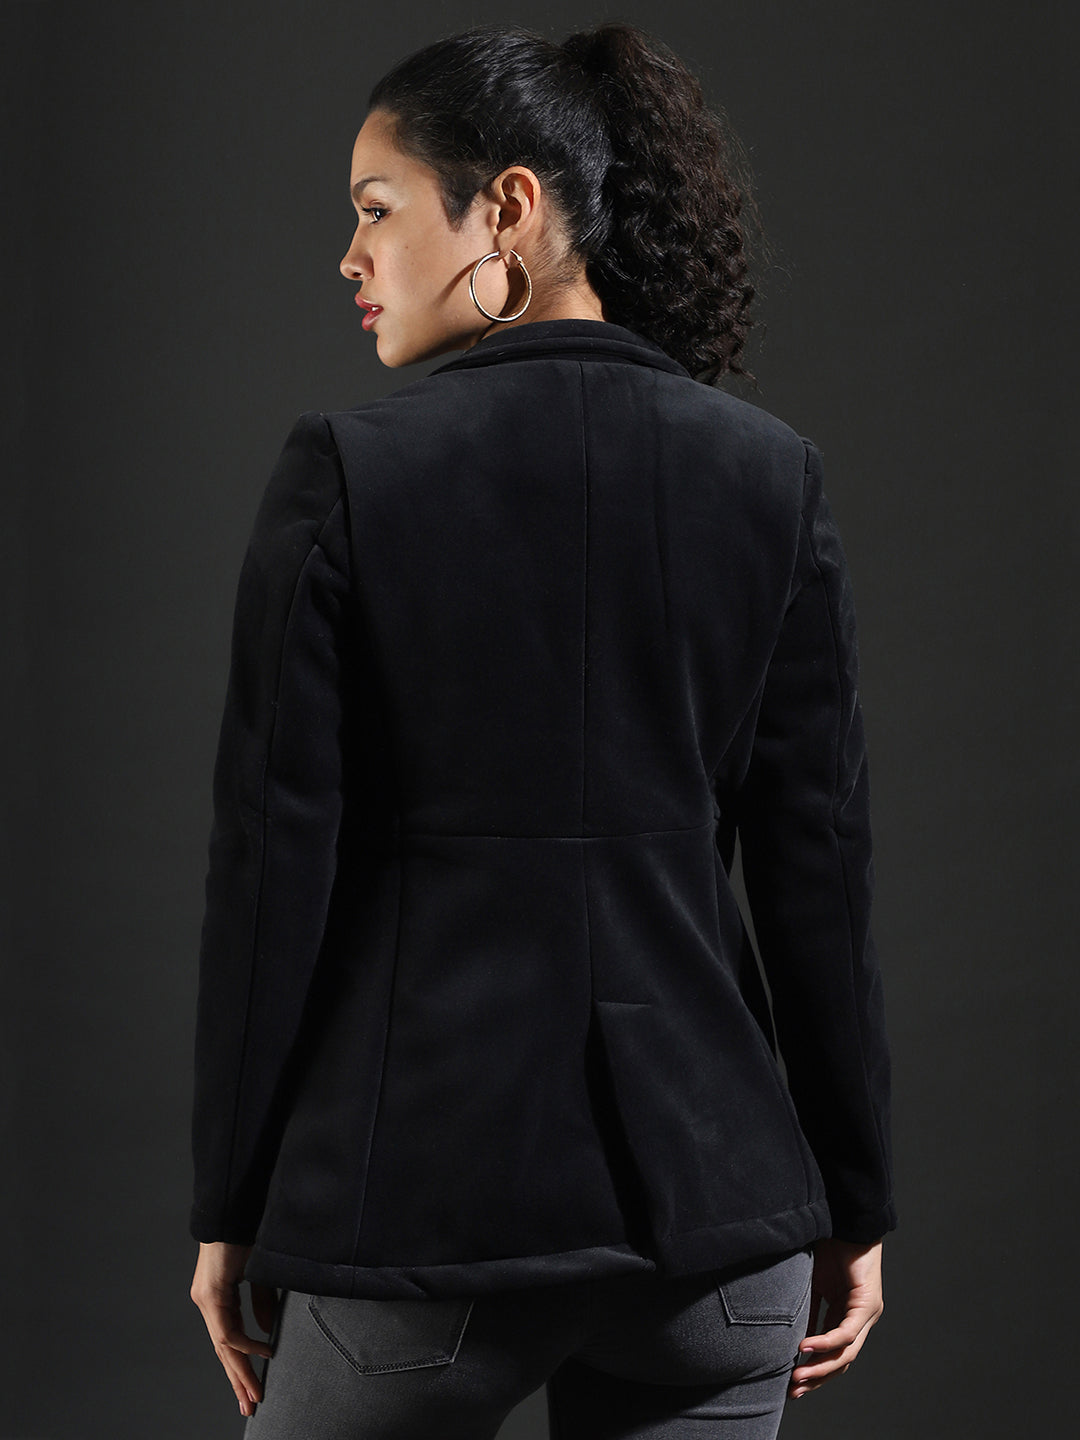 Single-Breasted Blazer With Power Shoulders